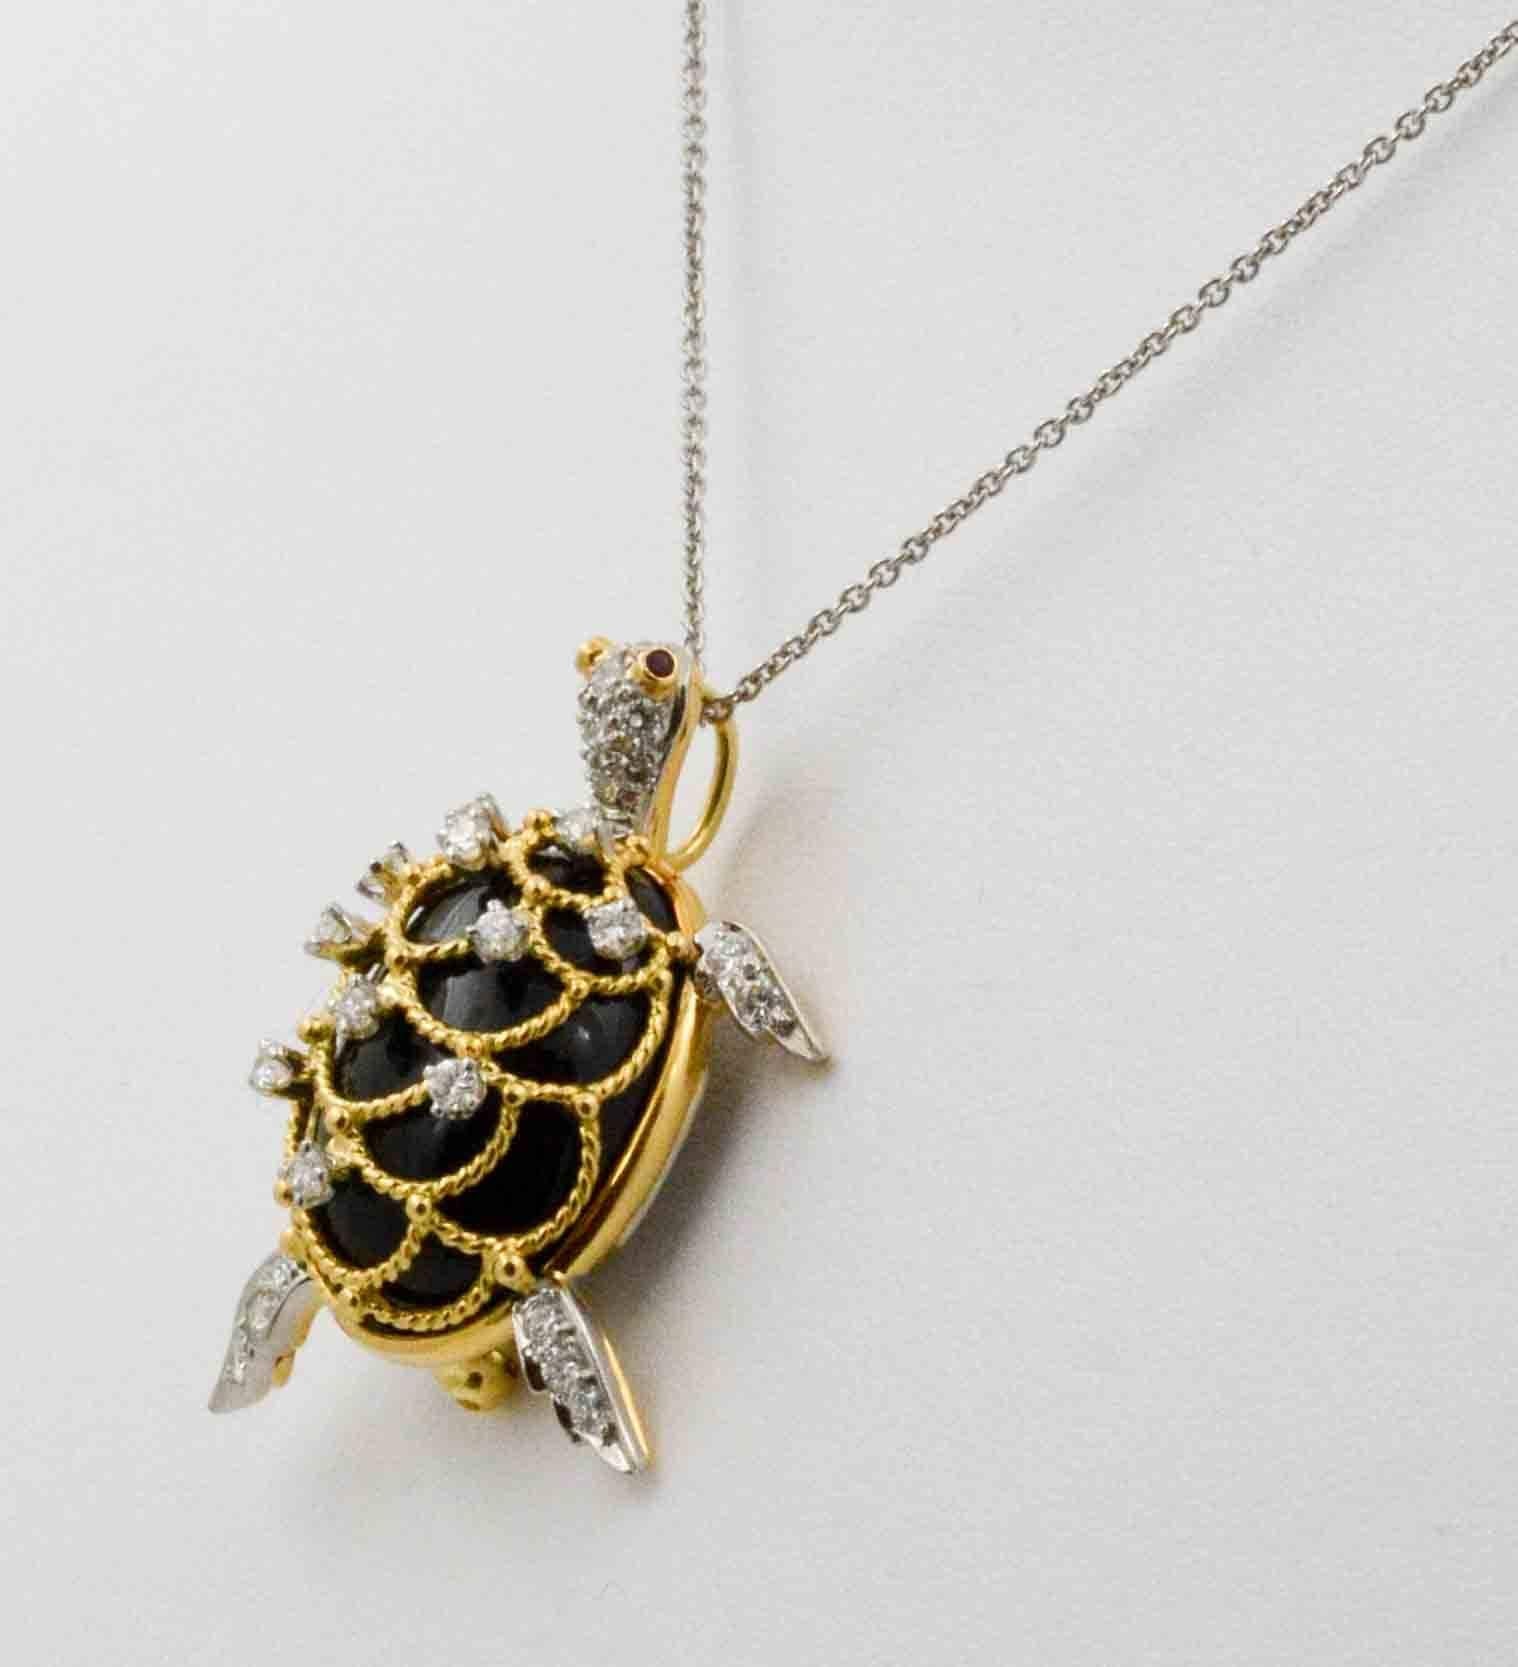 A captivating sea turtle, created by Hammerman Brothers in New York City, has scallops of 18 karat yellow gold. Scattered throughout the scallops on his tiny shell, on his feet as well as head, are 29 round brilliant cut diamonds (0.48 carats) set